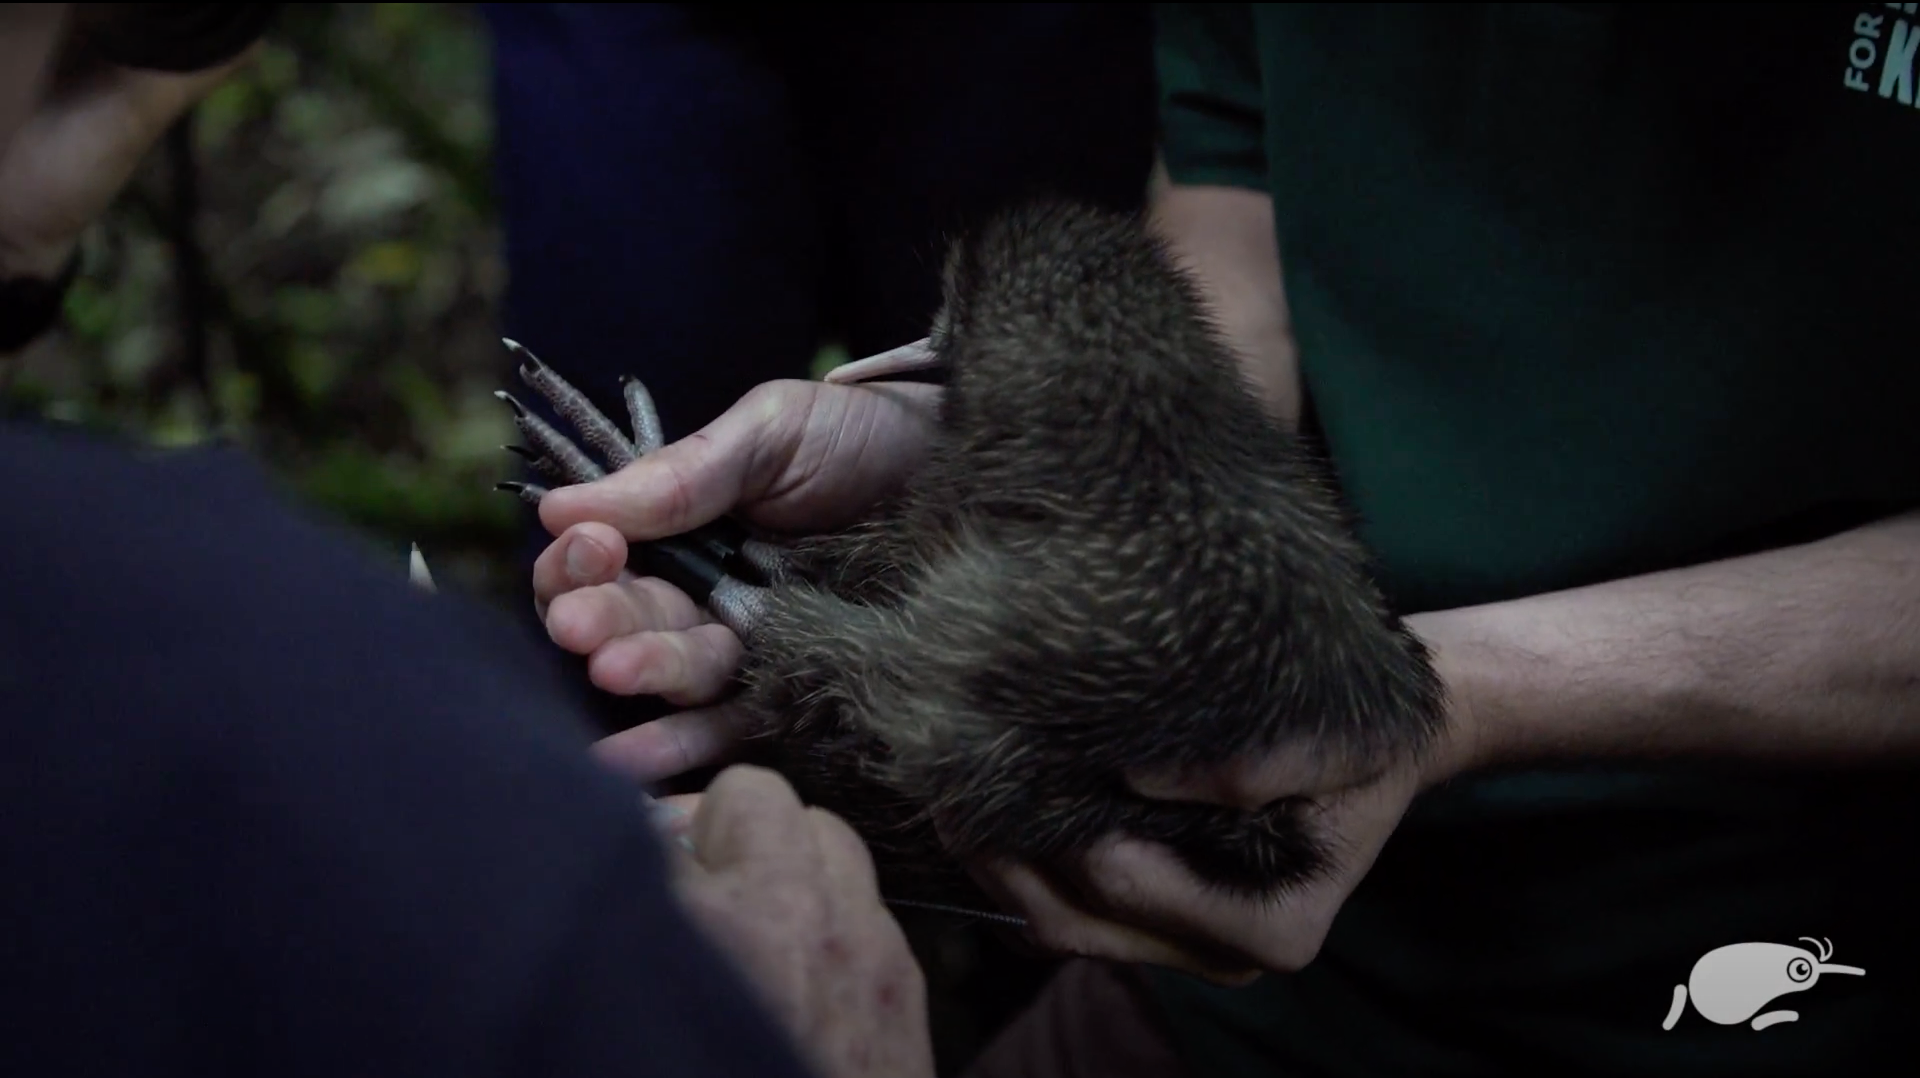 Kevin the kiwi being held by a conservation worker